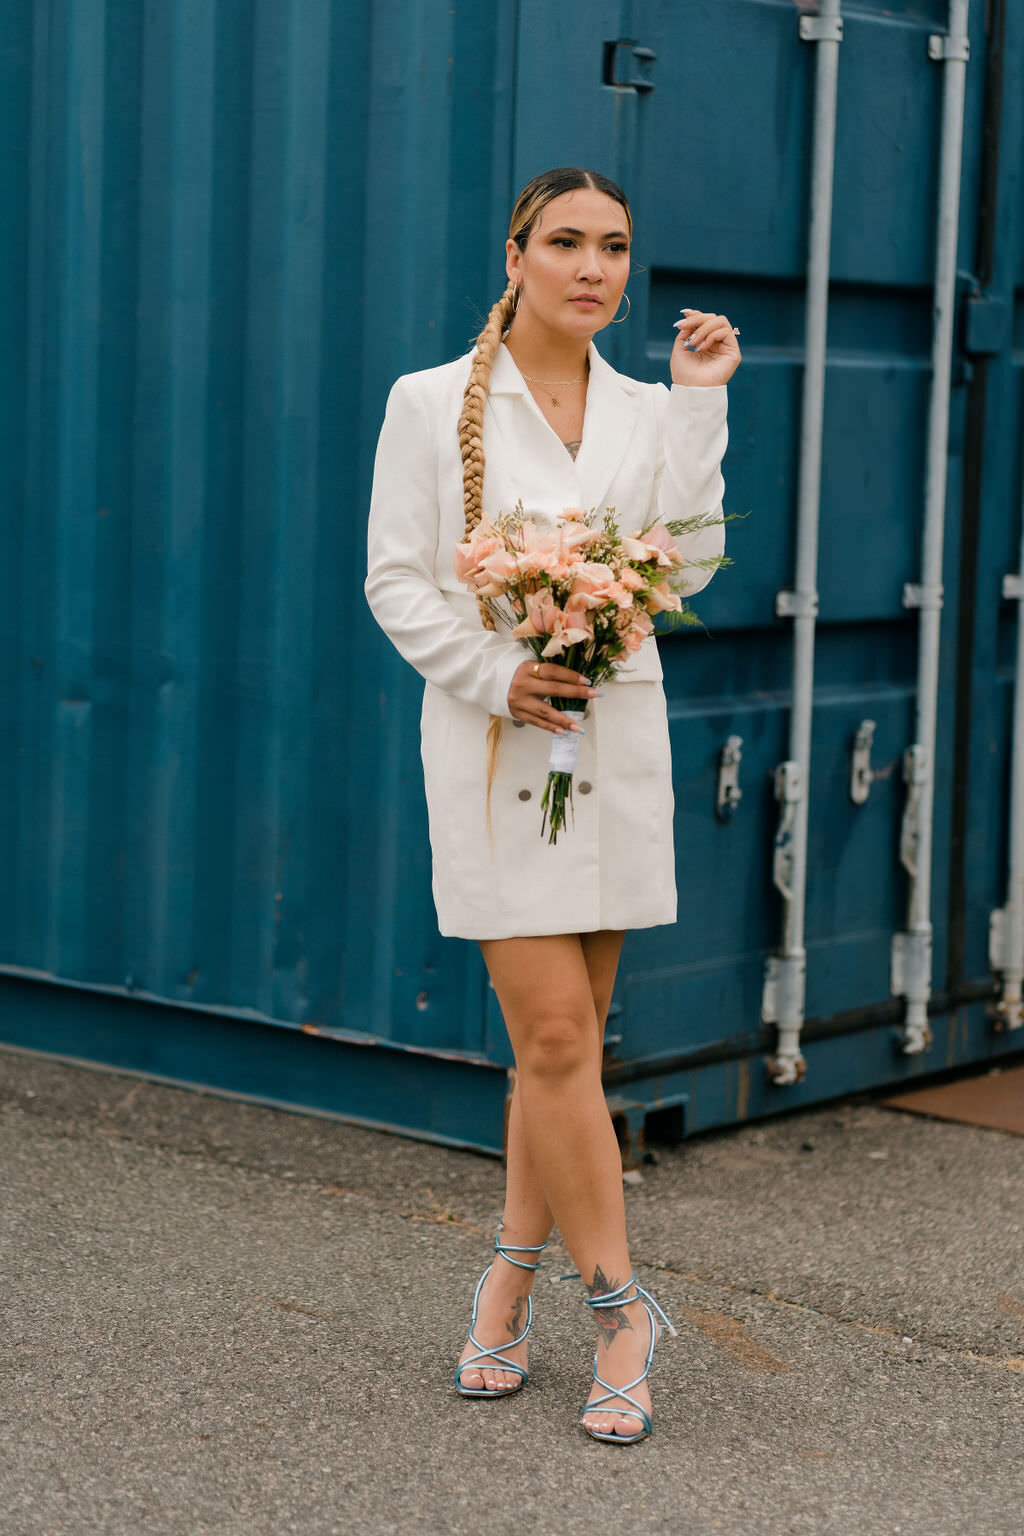 bride posing with one hand up towards her face and a bouquet in the other